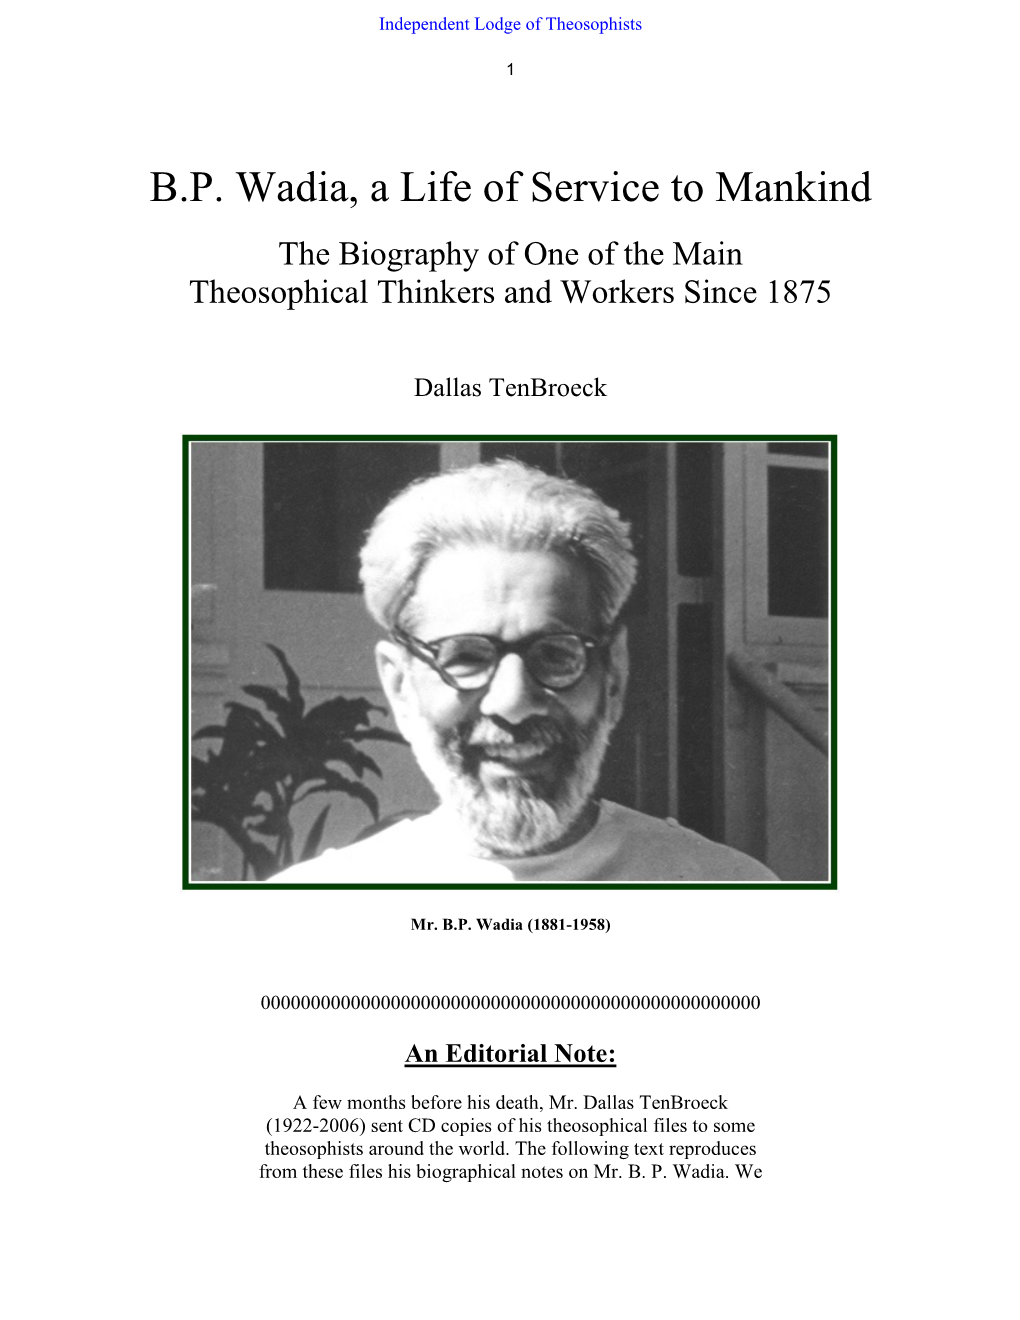 B.P. Wadia, a Life of Service to Mankind